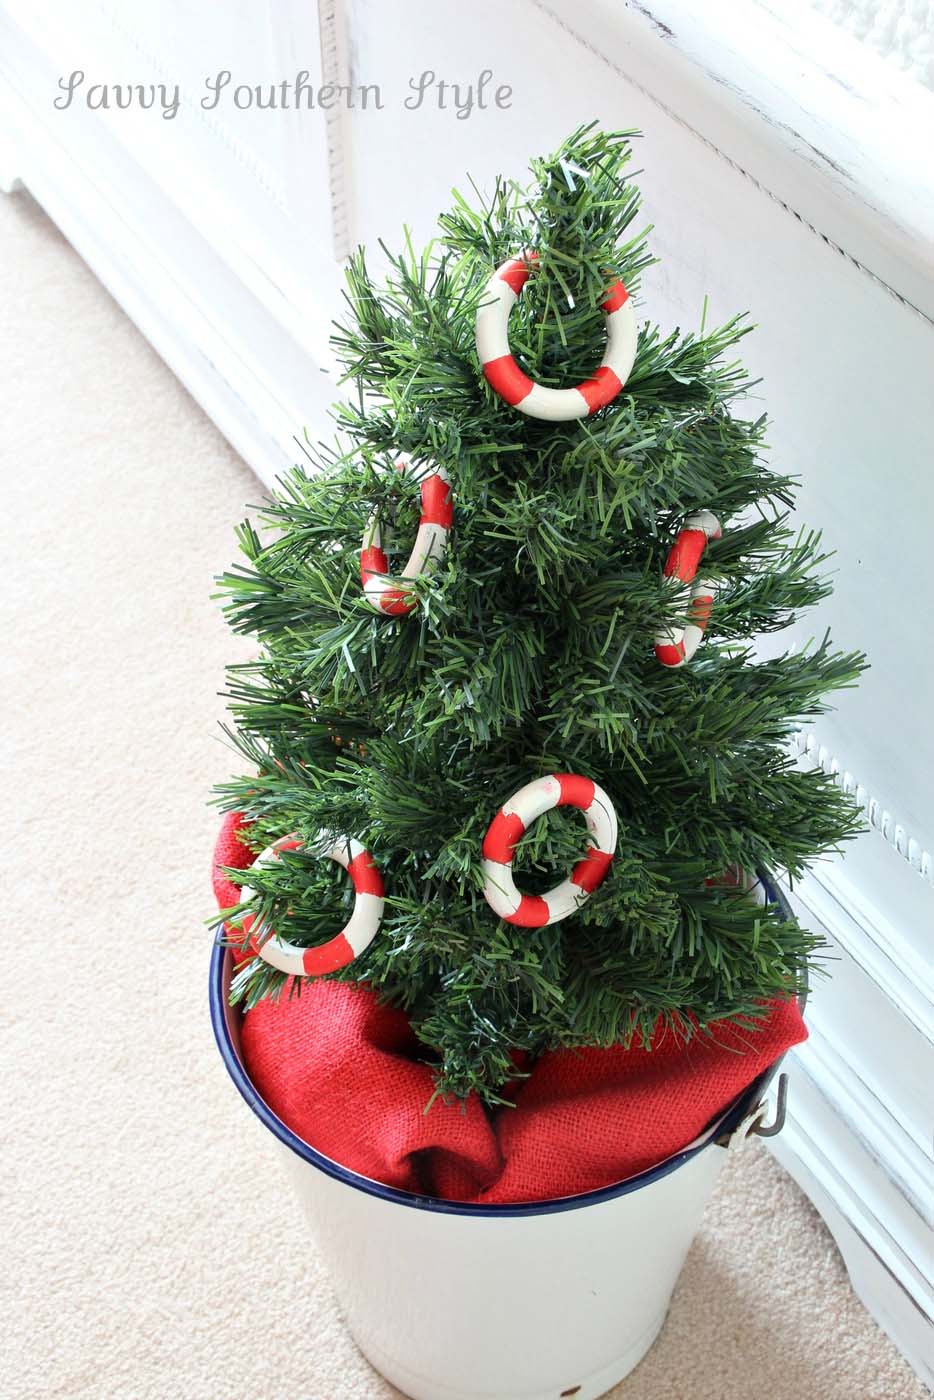 A small tree in a Christmas decorated bedroom gets some nautical flair.